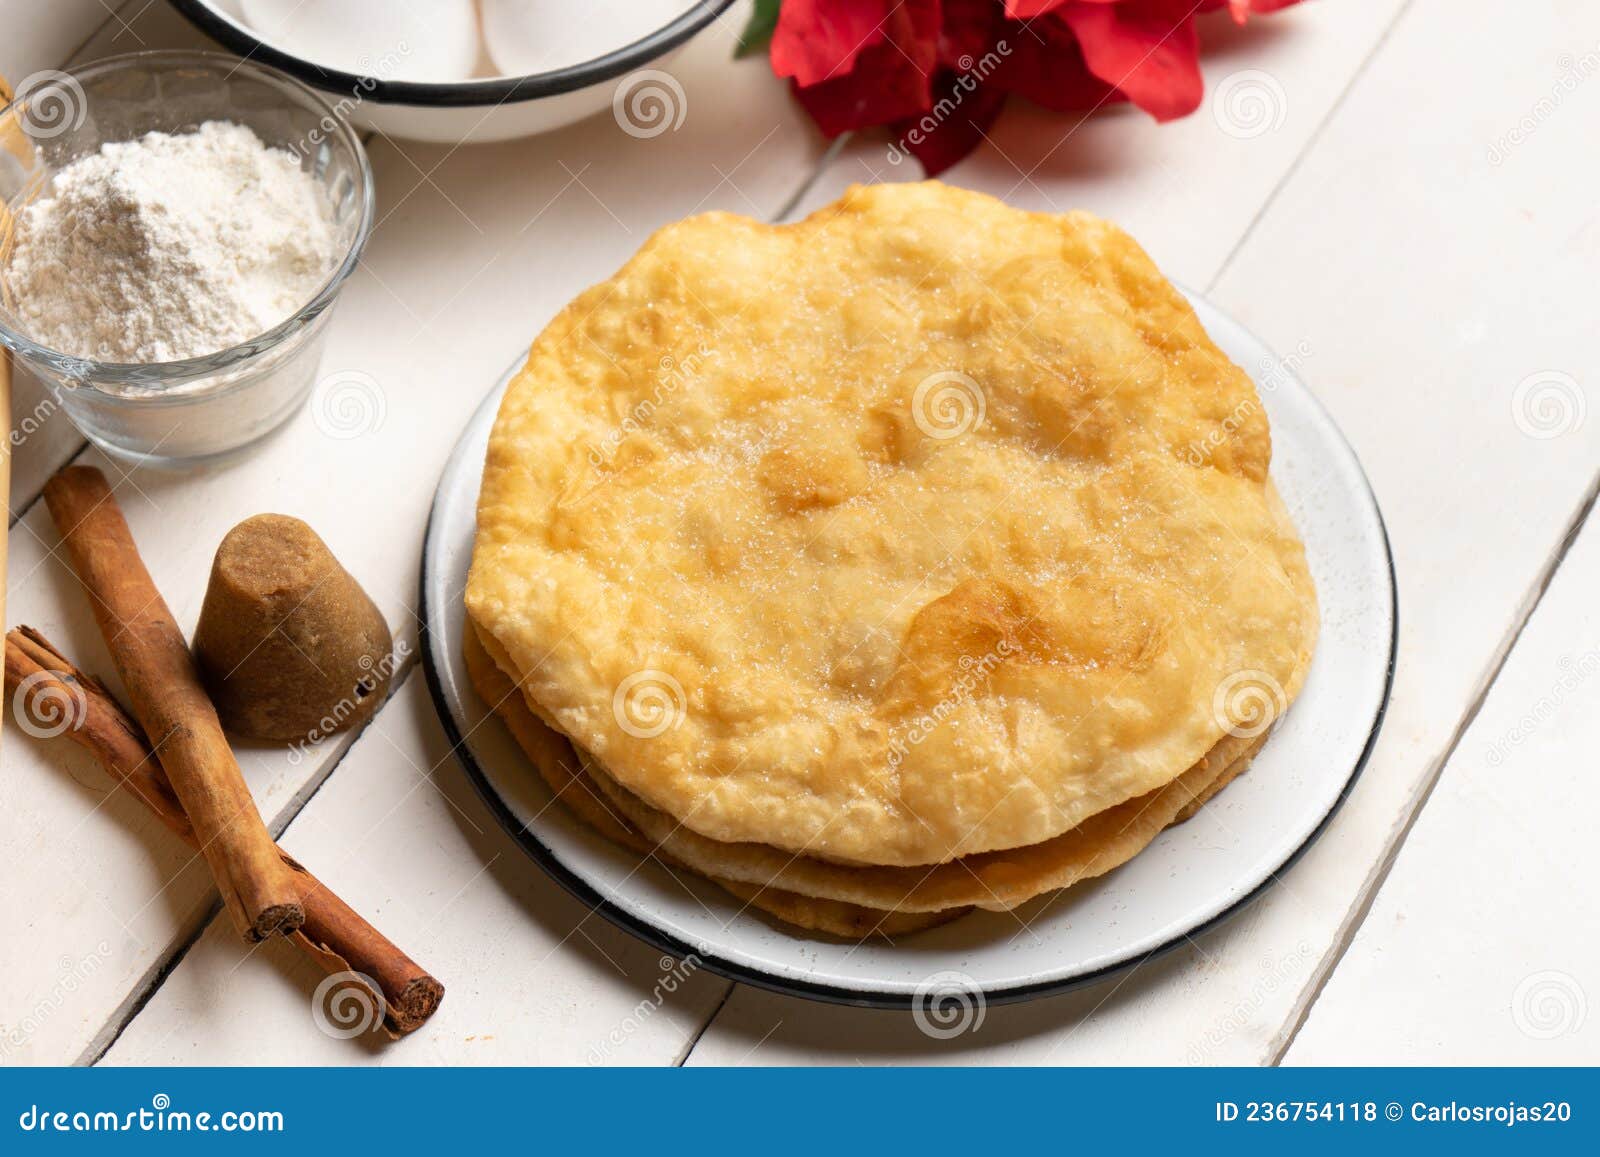 christmas fritters with piloncillo and cinnamon on a white background. mexican food